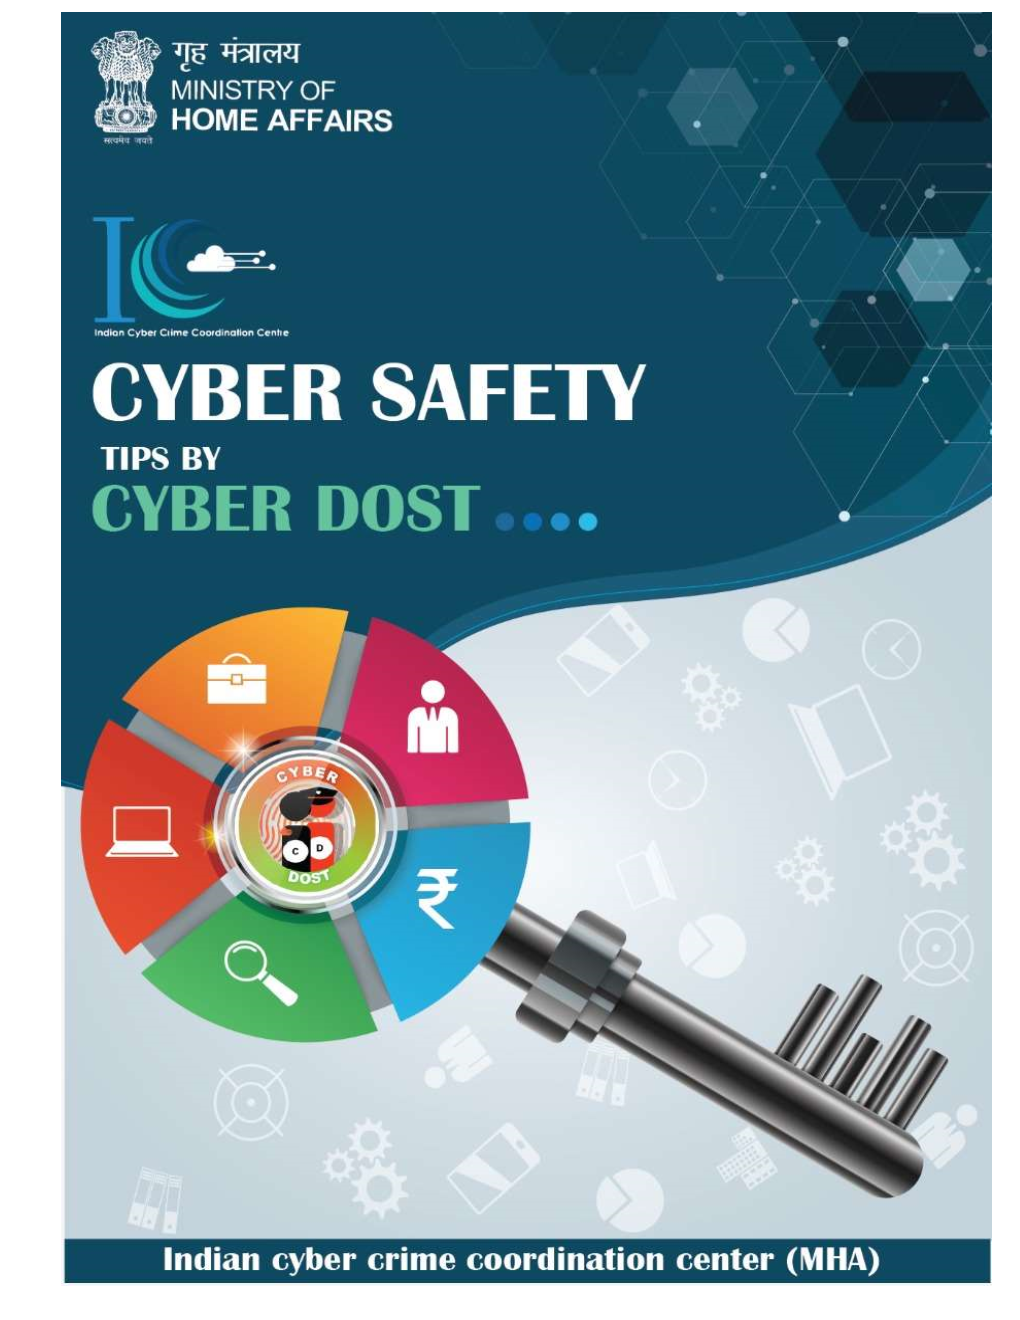 Cyber Security Tips by Cyber Dost